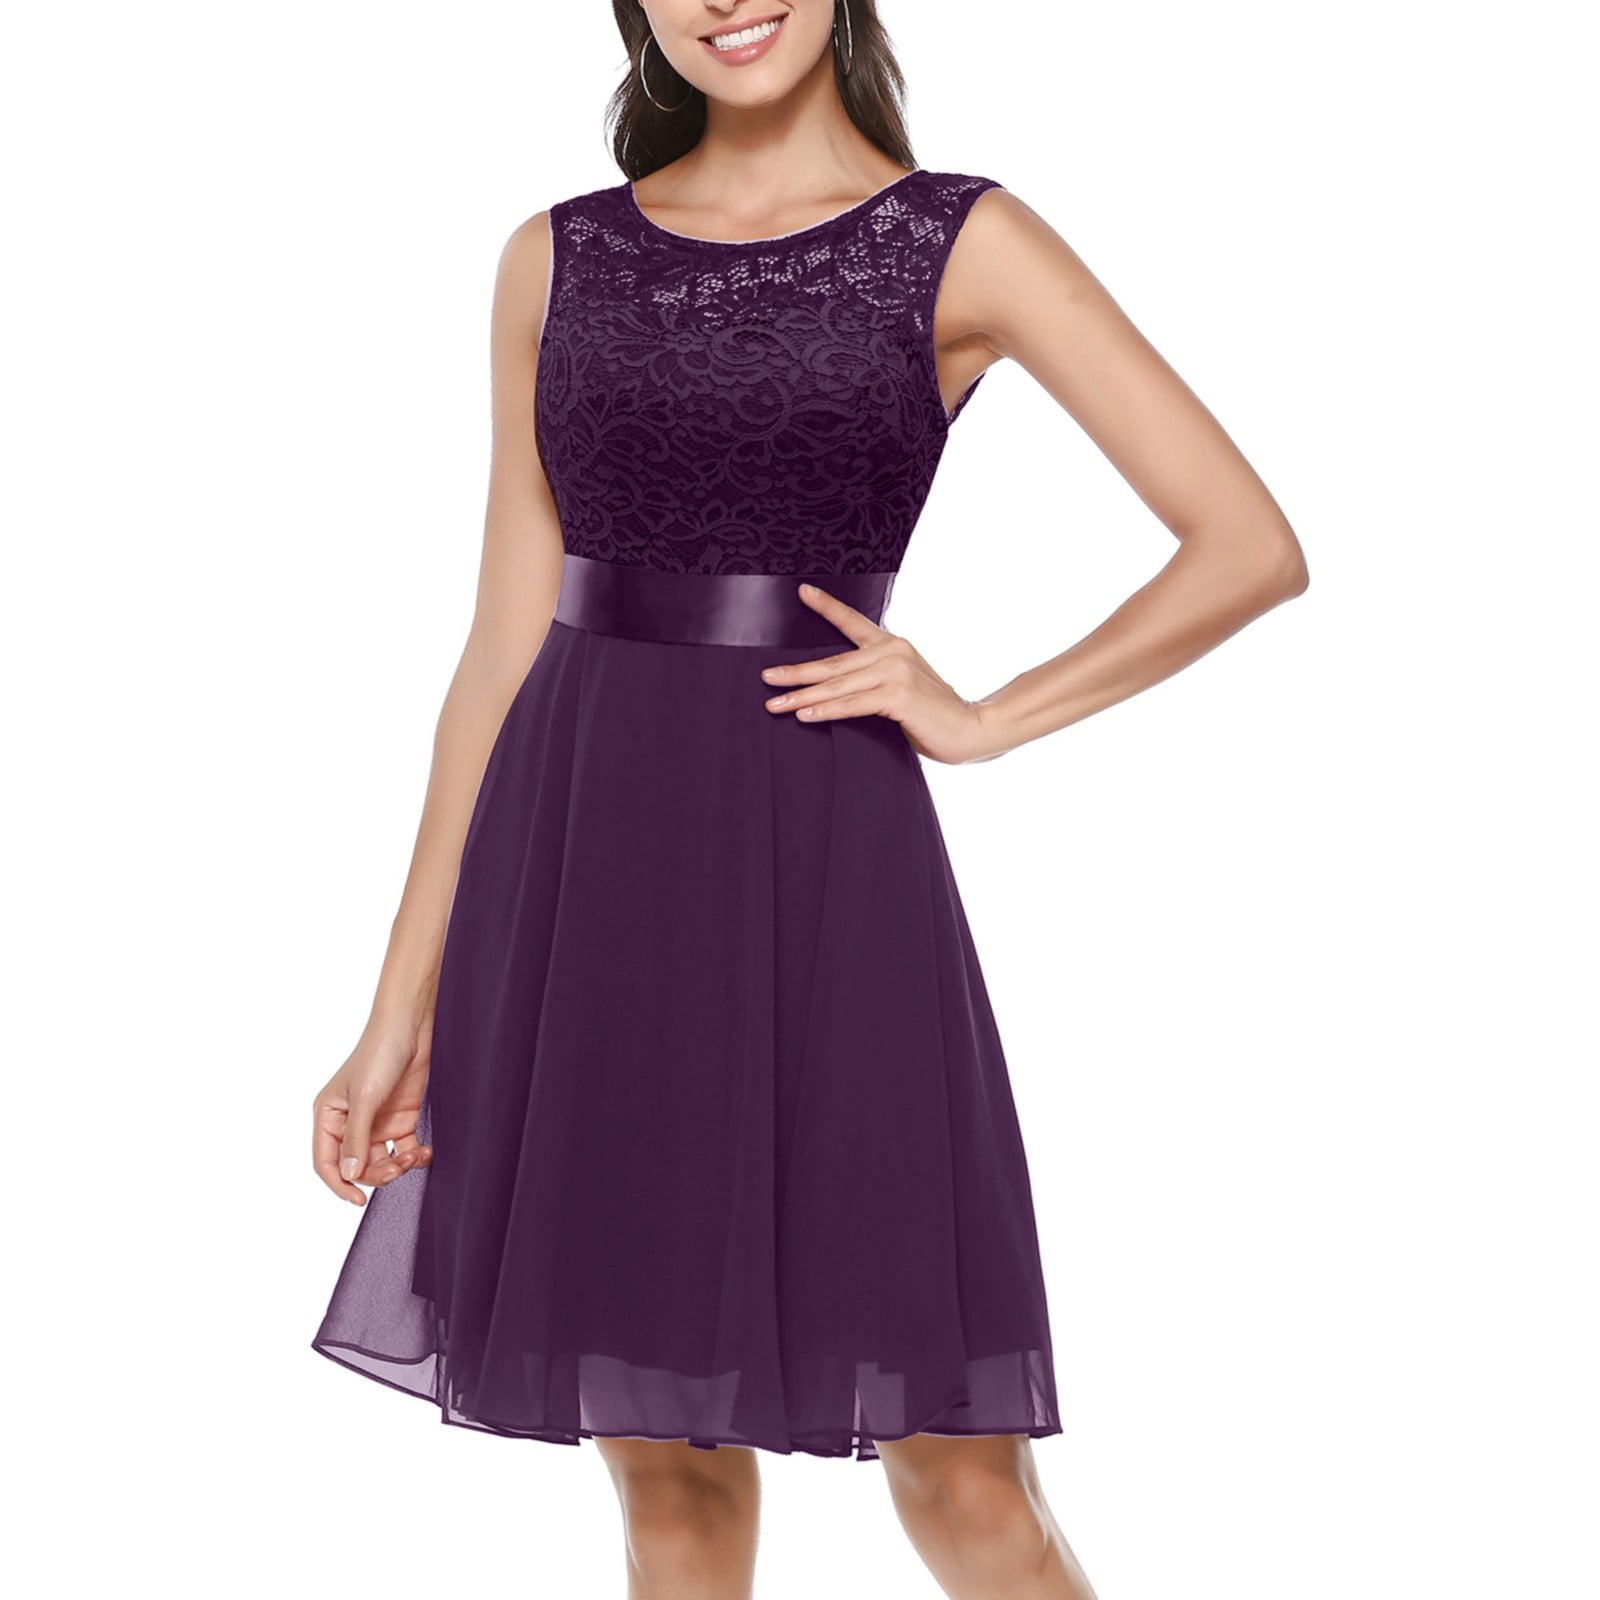 Sayhi Wedding Guest Dresses for Women Elegant Bridesmaid Mother of The Bride  Evening Party Solid Prom Gown Sleeveless Formal Dress Purple M 